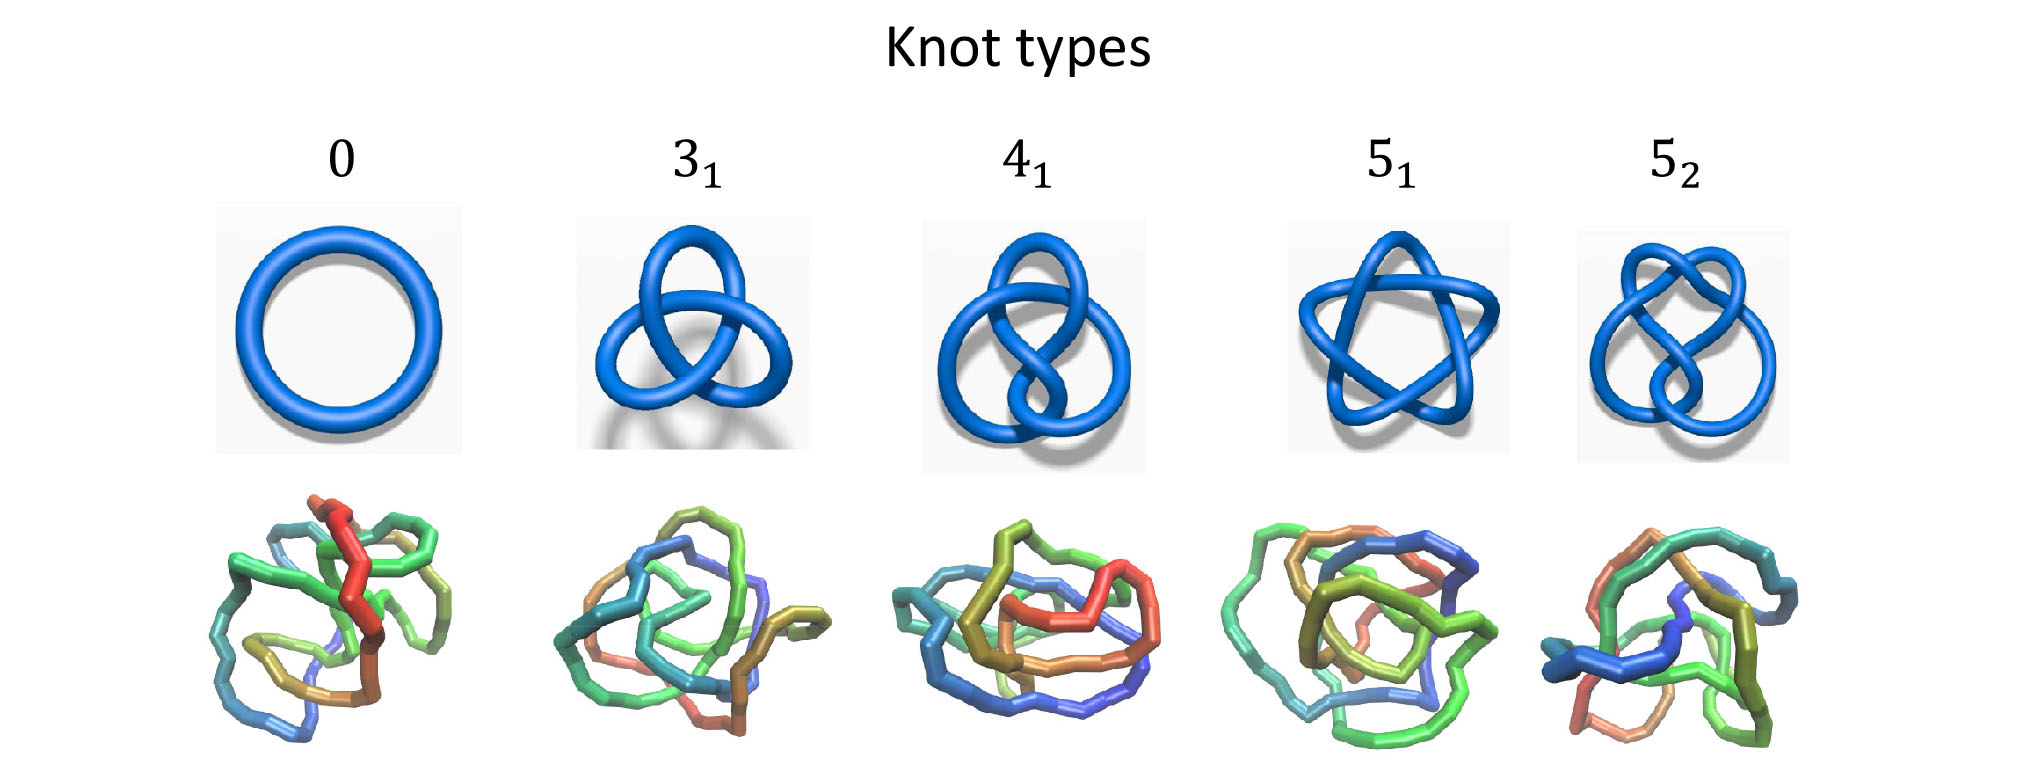 Knot type to be identified